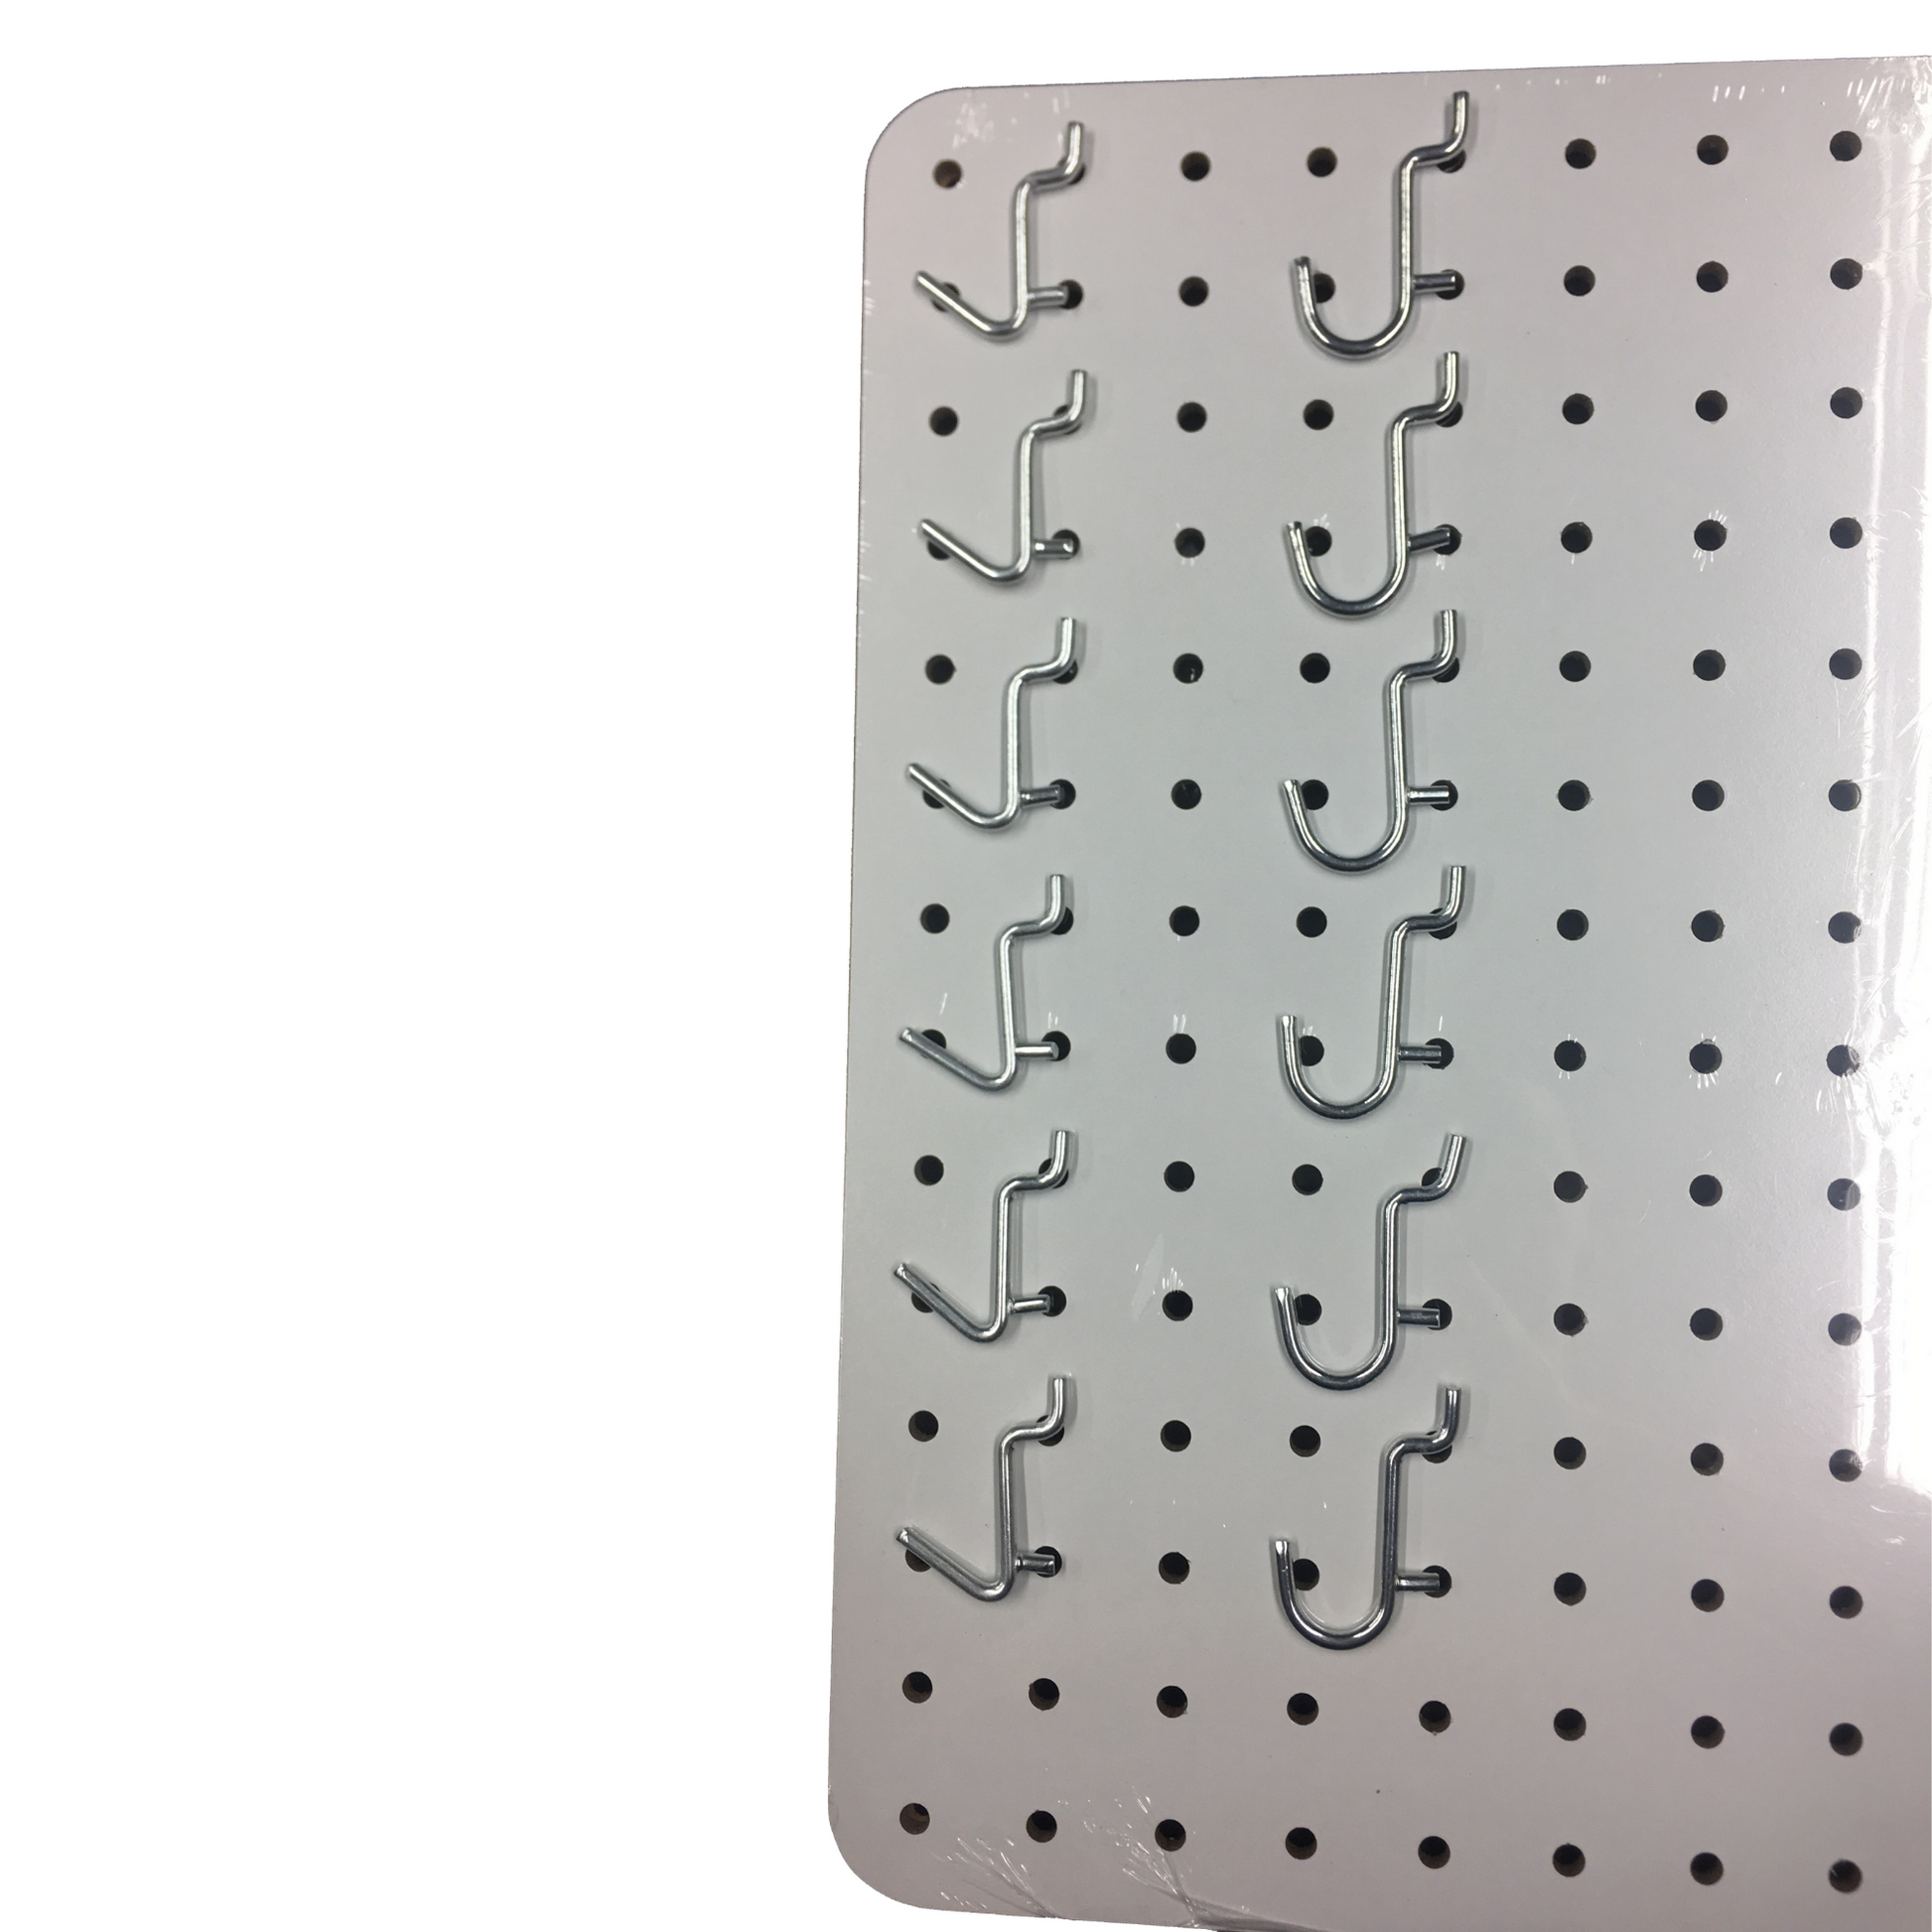 A white pegboard, 56x36cm in size, with twelve shiny metal hooks arranged on top of it. The hooks are designed for organizing tools and accessories, showcasing the pegboard's utility for keeping items tidy and accessible.